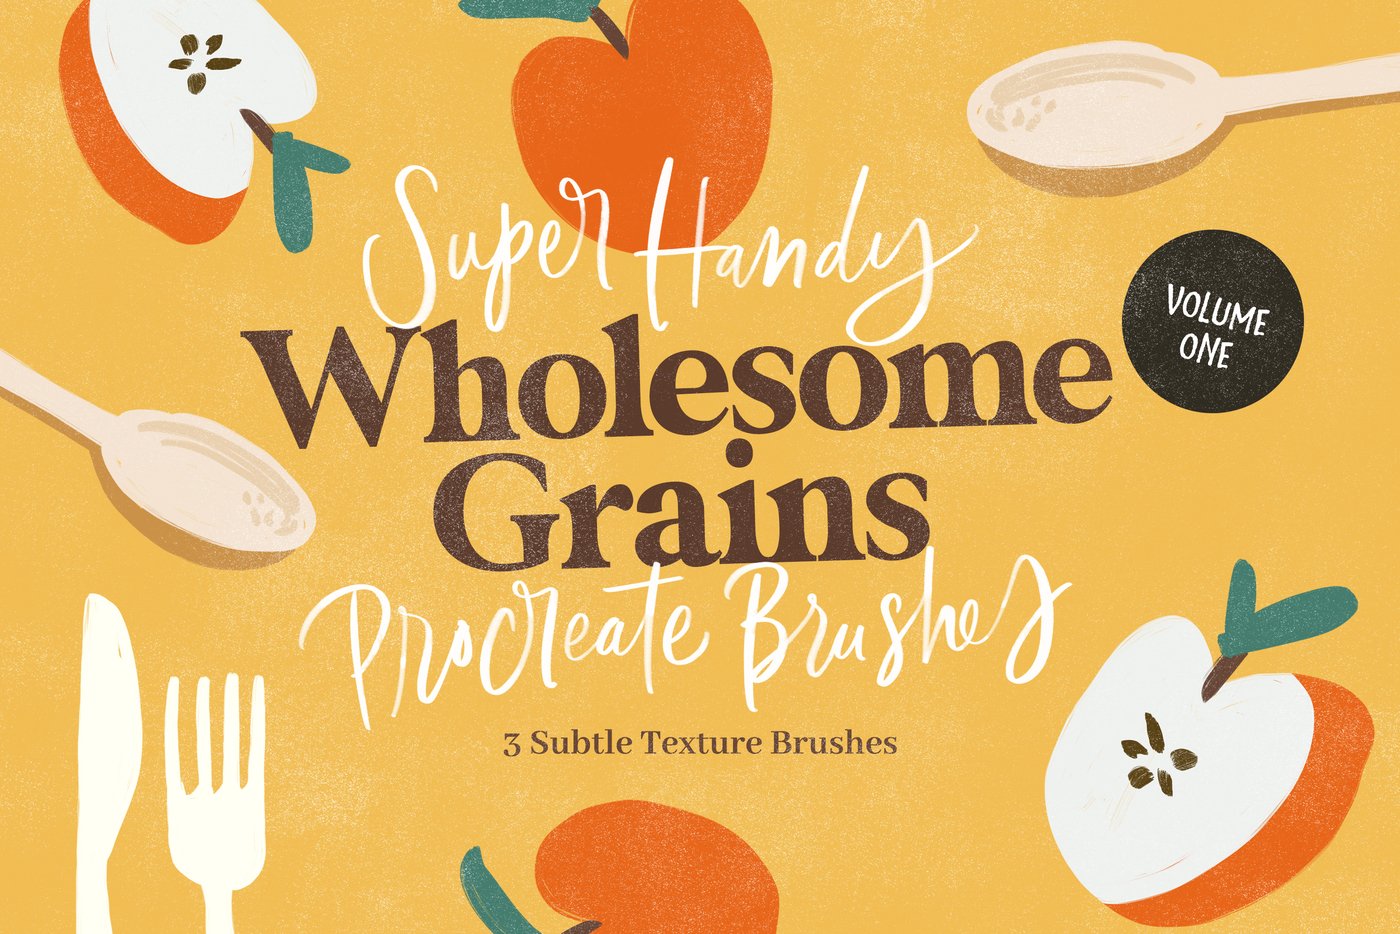 Wholesome Grains Vol.1 Procreate Brushes main product image by Nicky Laatz